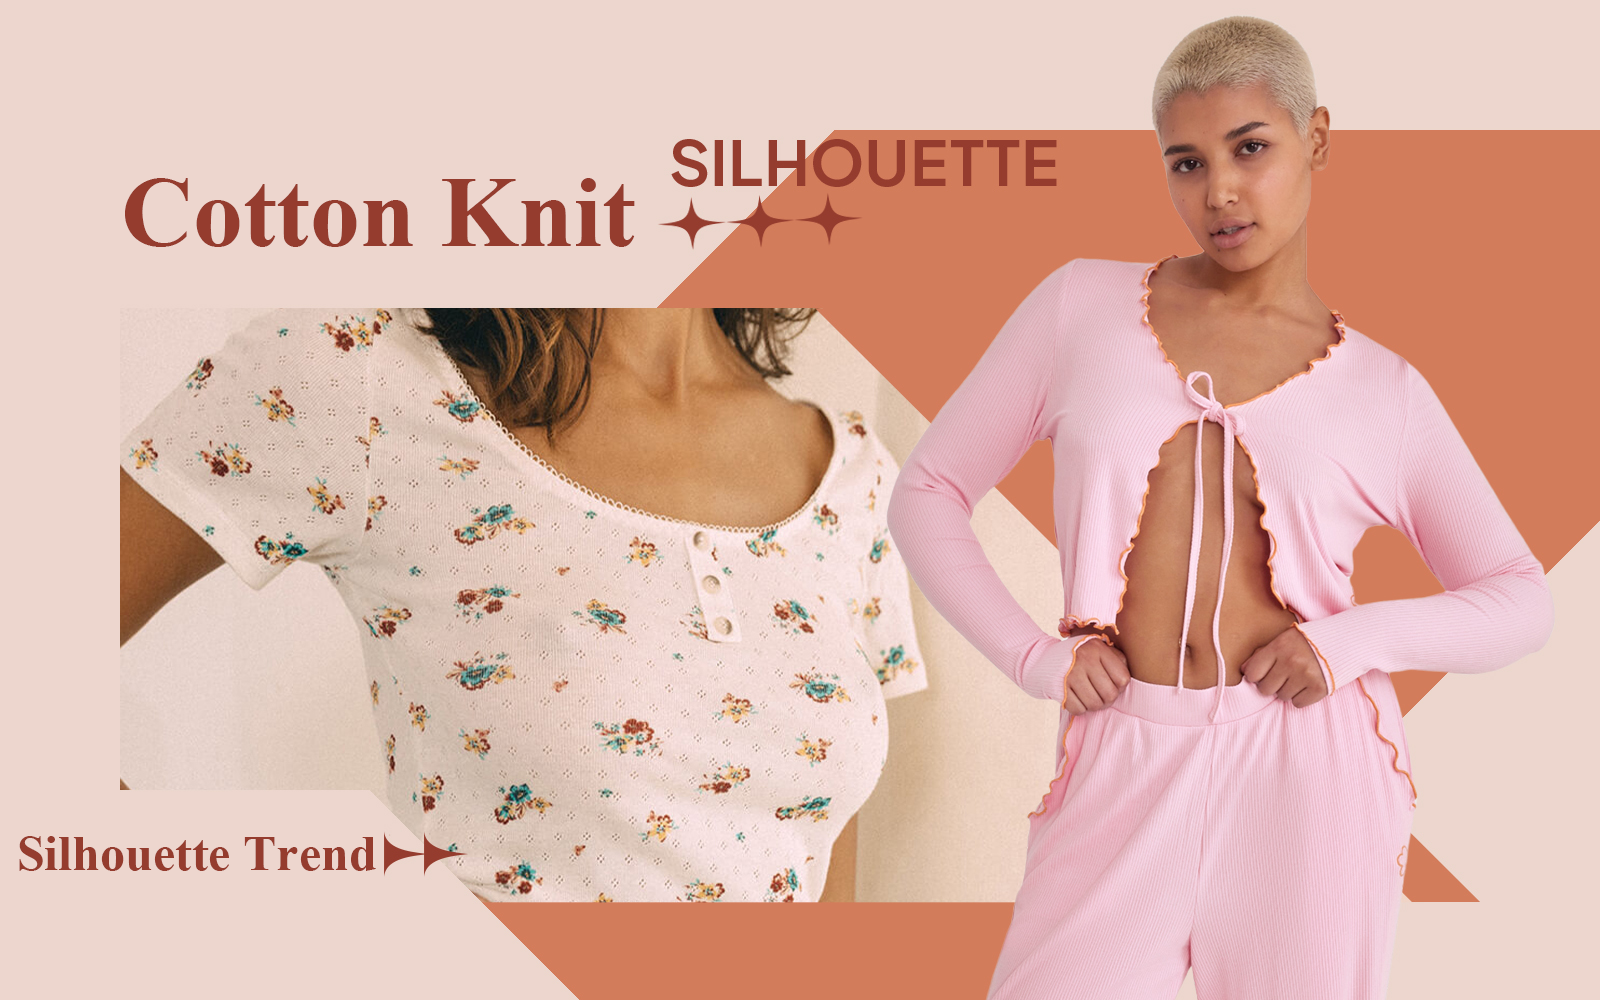 Cotton Knit -- The Silhouette Trend for Women's Homewear